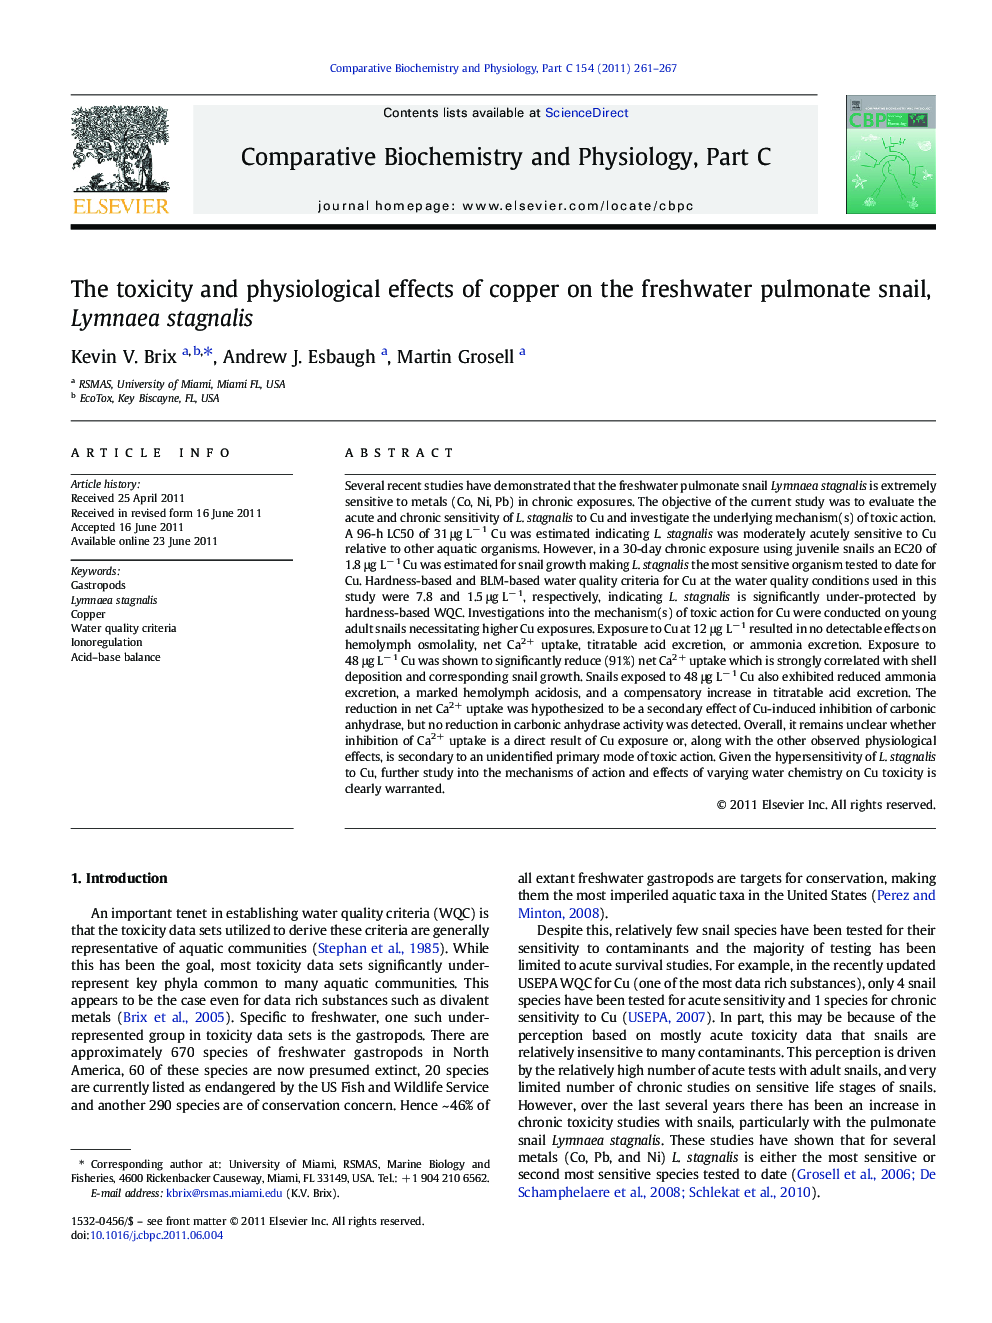 The toxicity and physiological effects of copper on the freshwater pulmonate snail, Lymnaea stagnalis